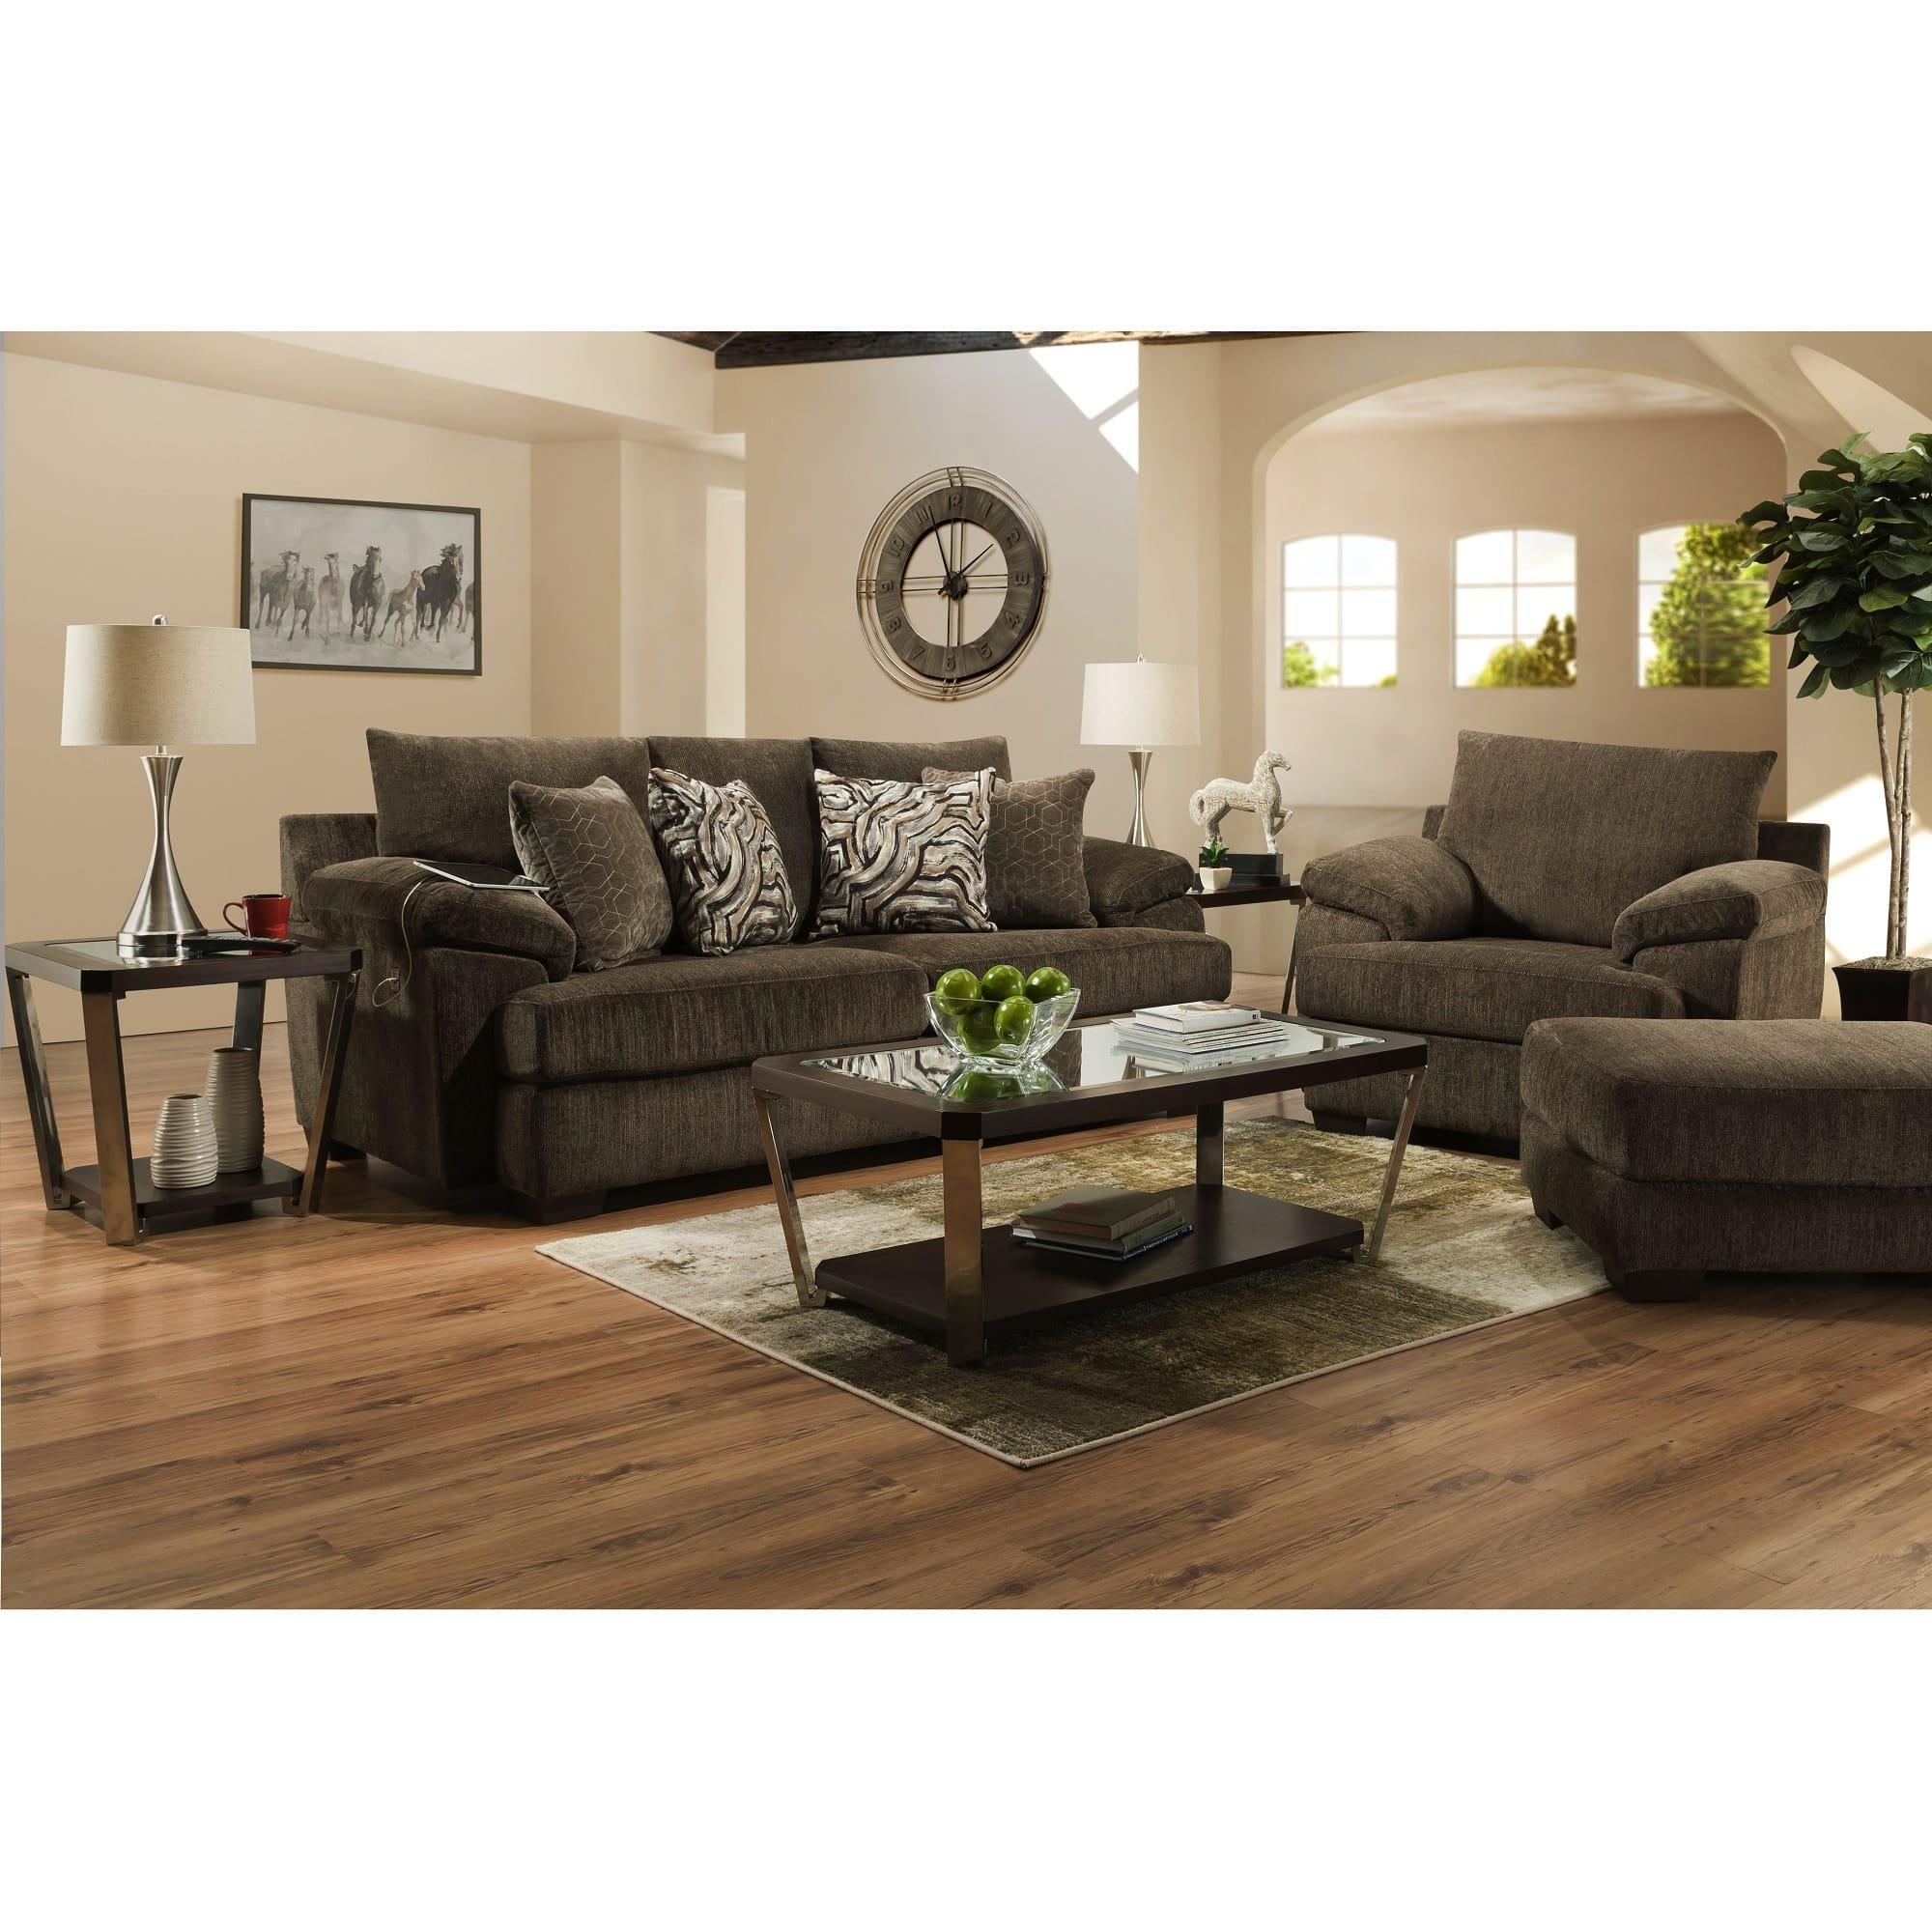 Rent To Own Franklin 9 Piece Phoenix Living Room Collection At Aarons Today